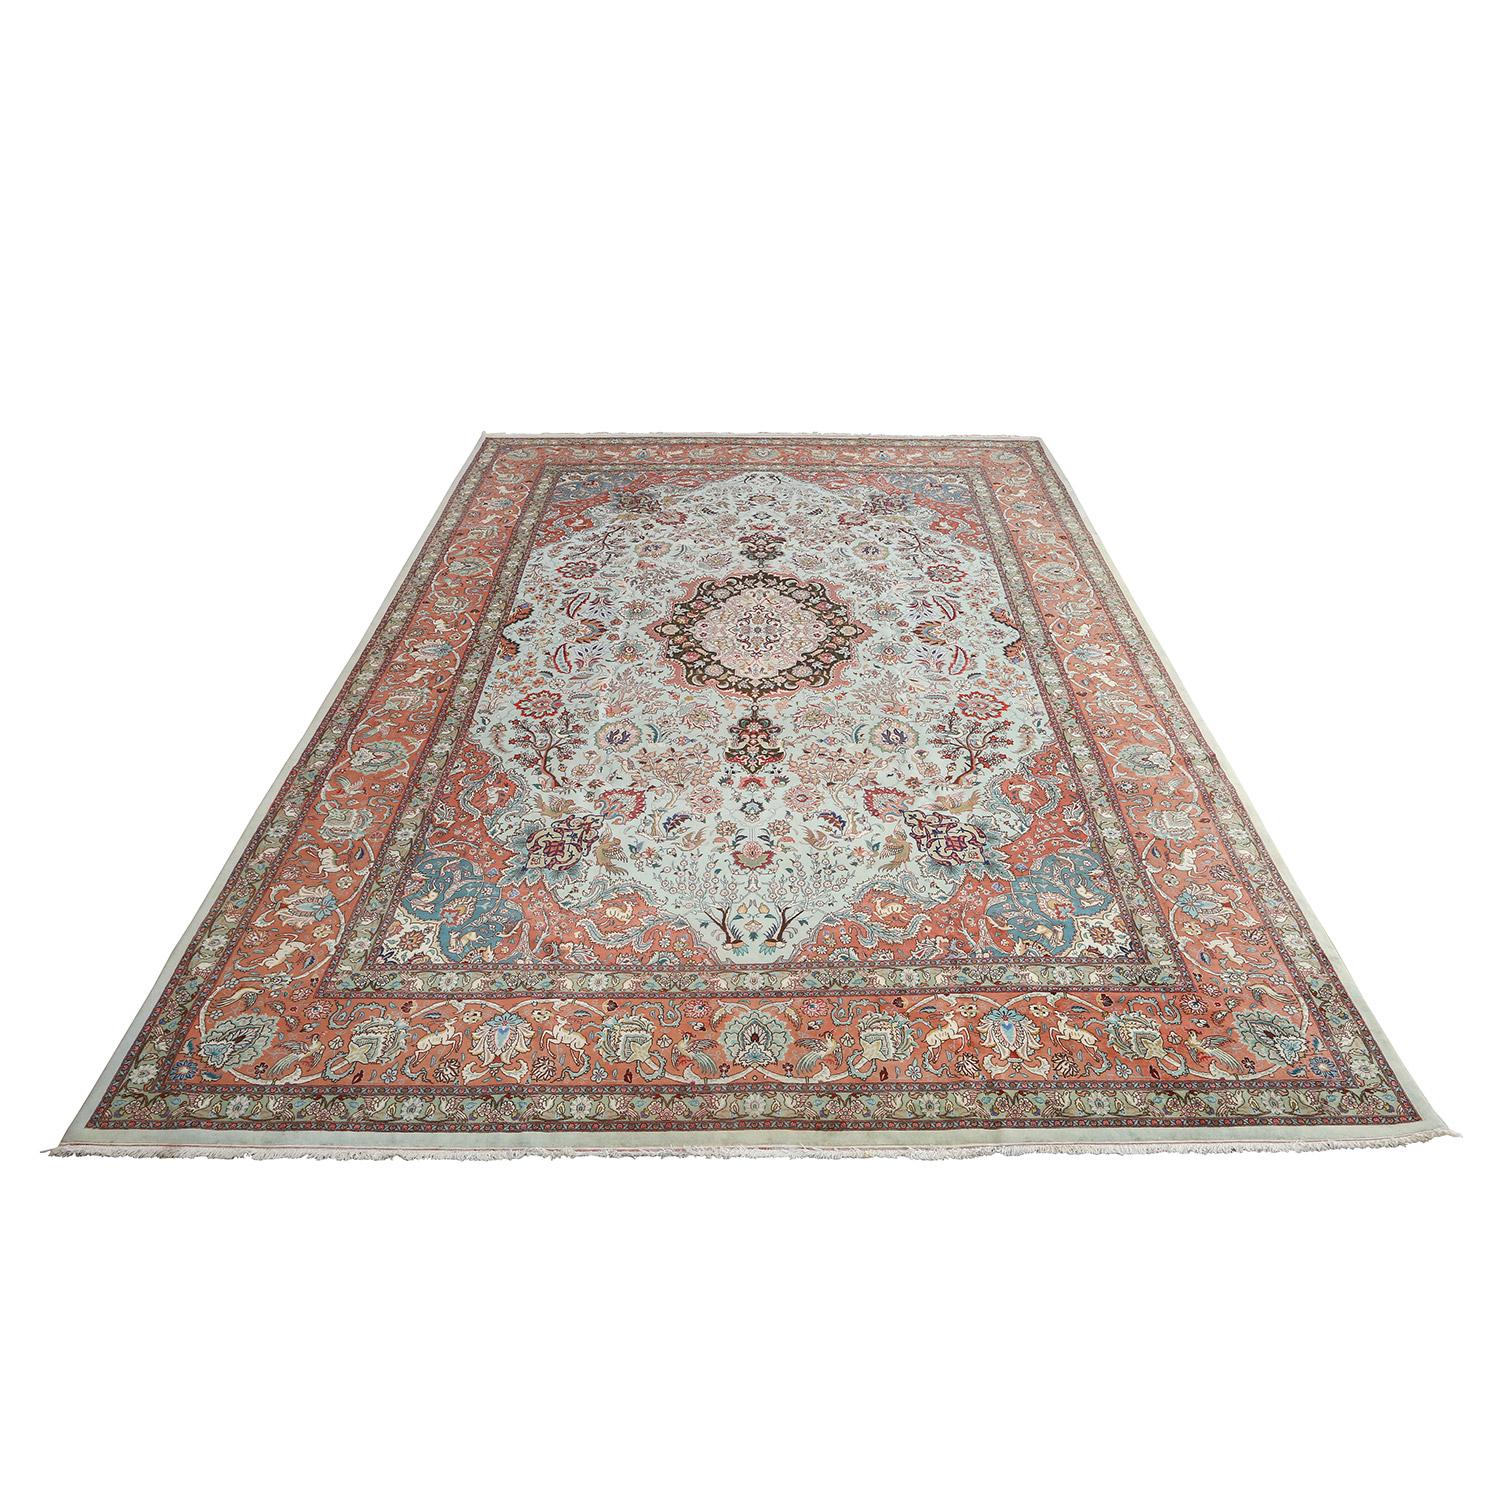 This vintage Tabriz rug boasts an enchanting center medallion design, a true masterpiece of Persian weaving. Measuring an impressive 16 feet by 11 feet and 10 inches, it commands attention and defines the space it graces.

The rug's elaborate